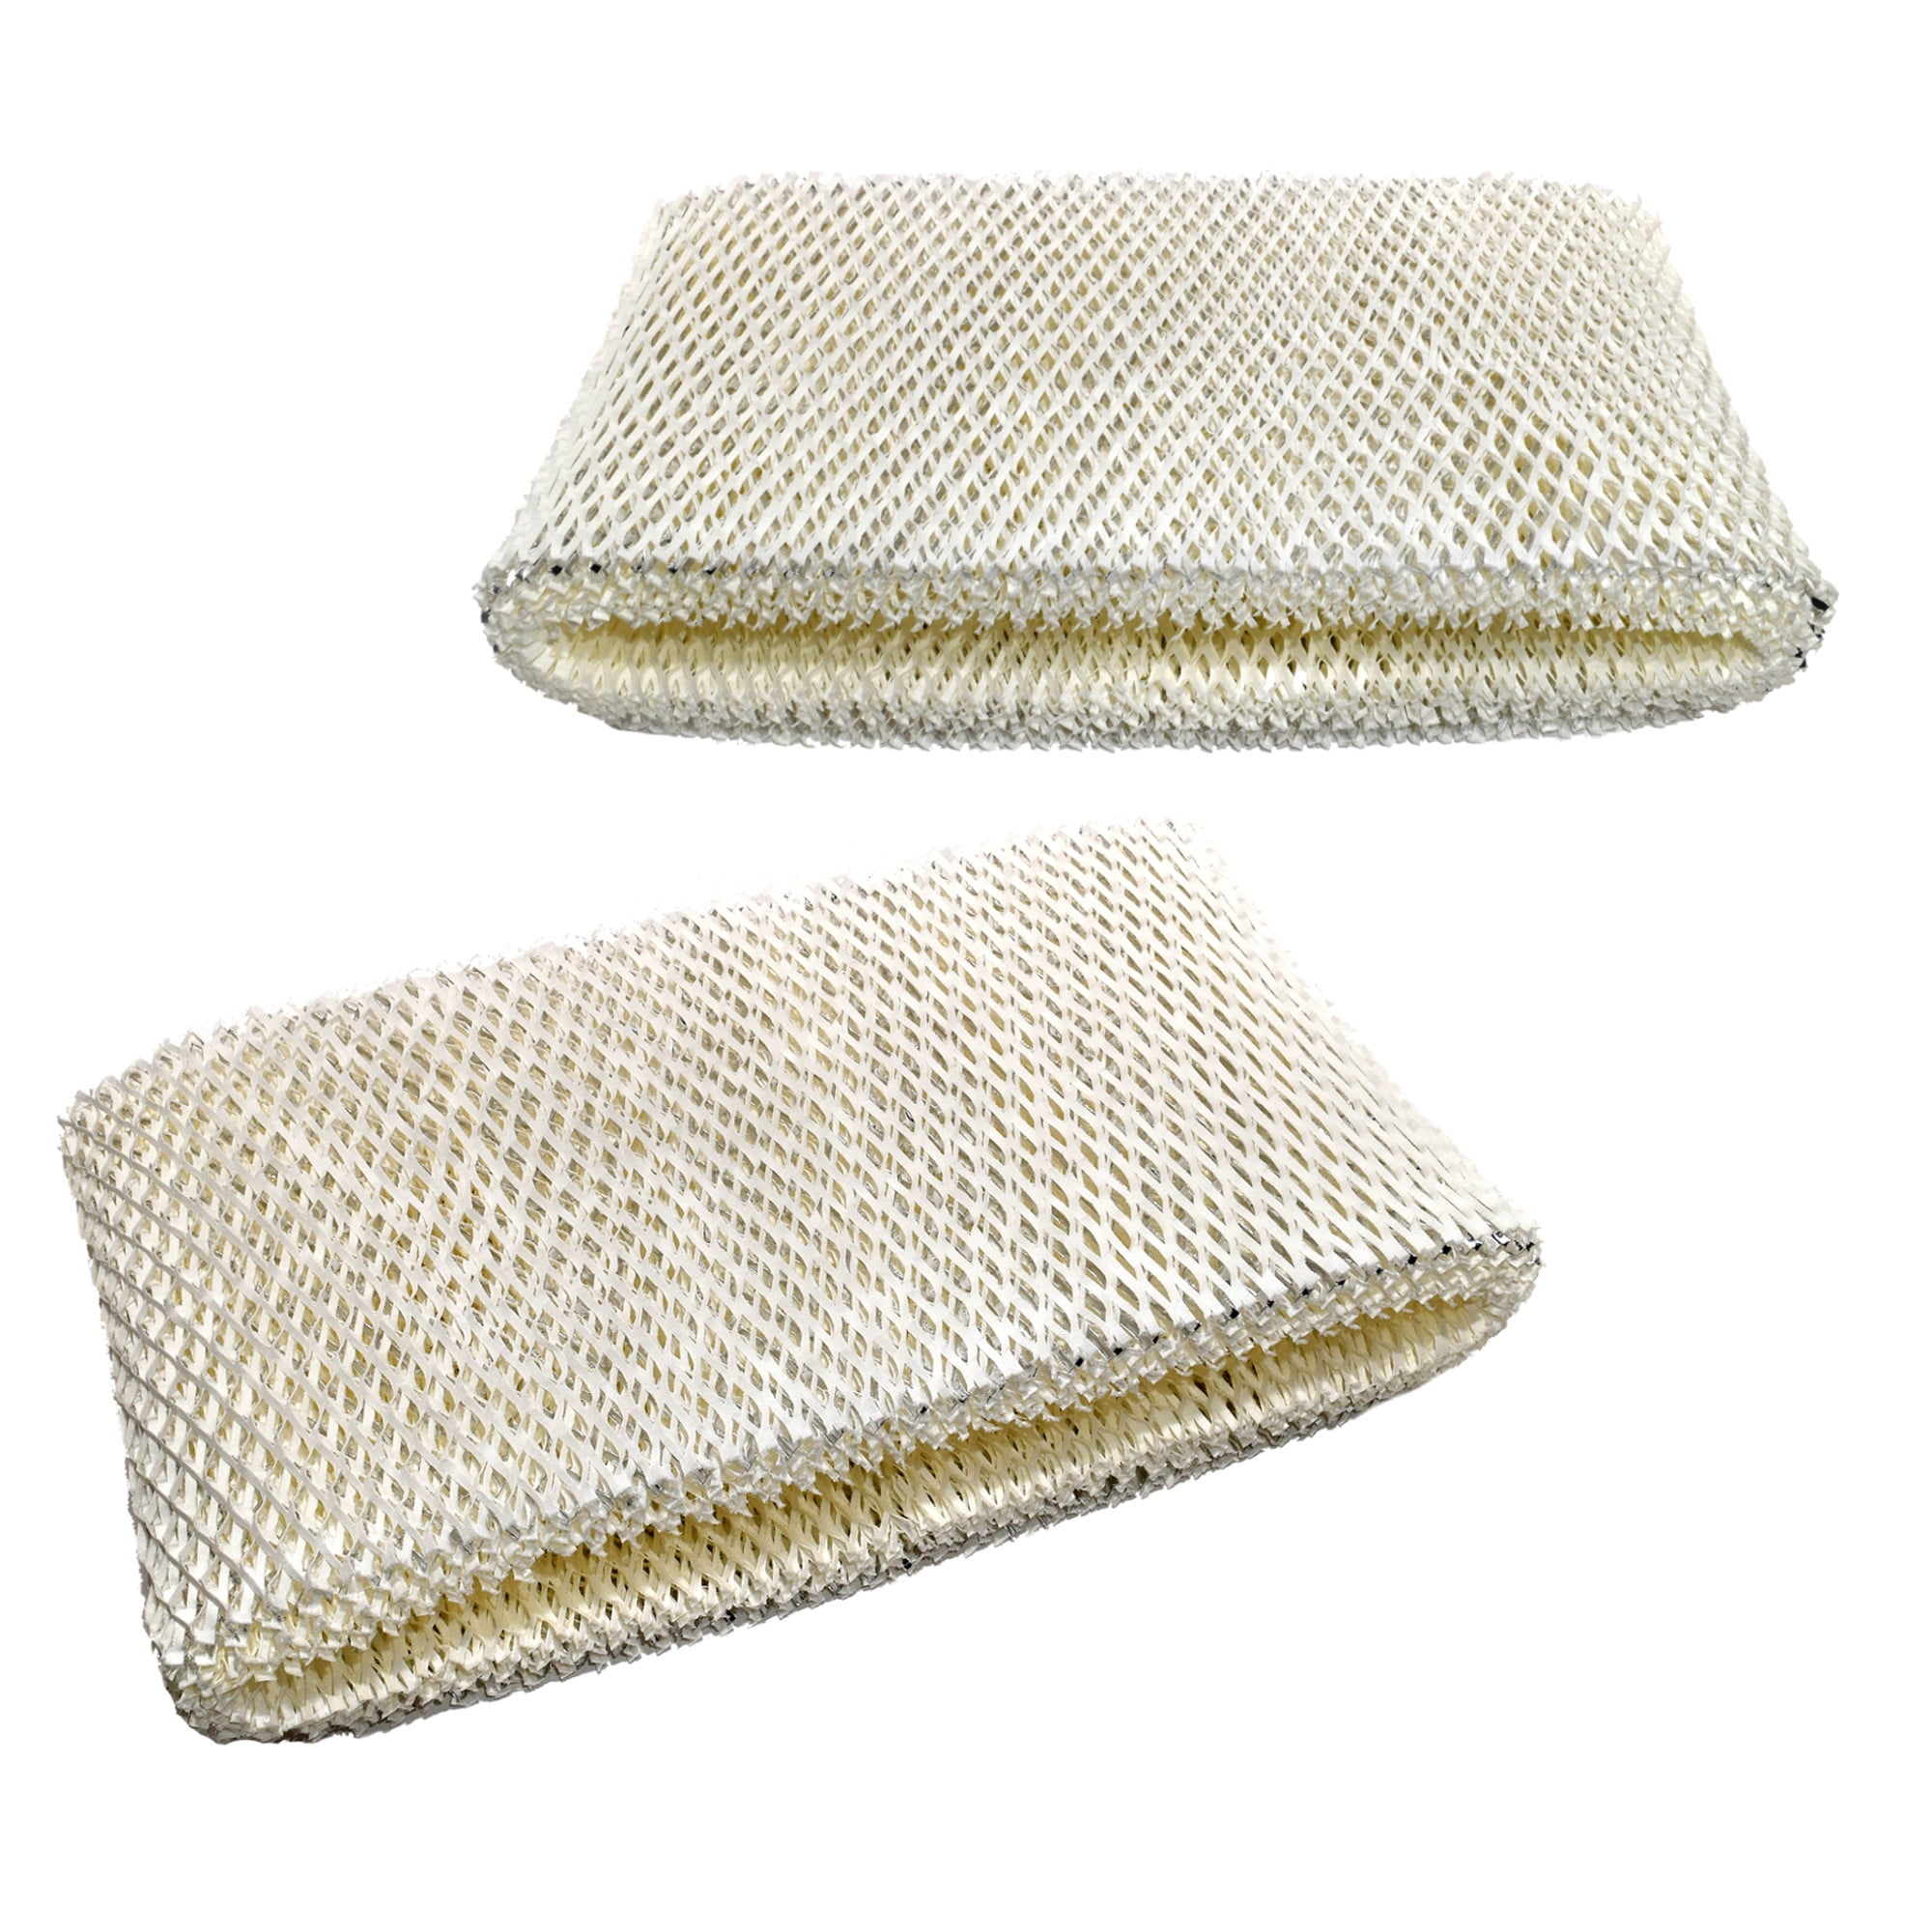 2x Humidifier Filter for Sunbeam SF221,SCM3657,Bionaire BCM3656